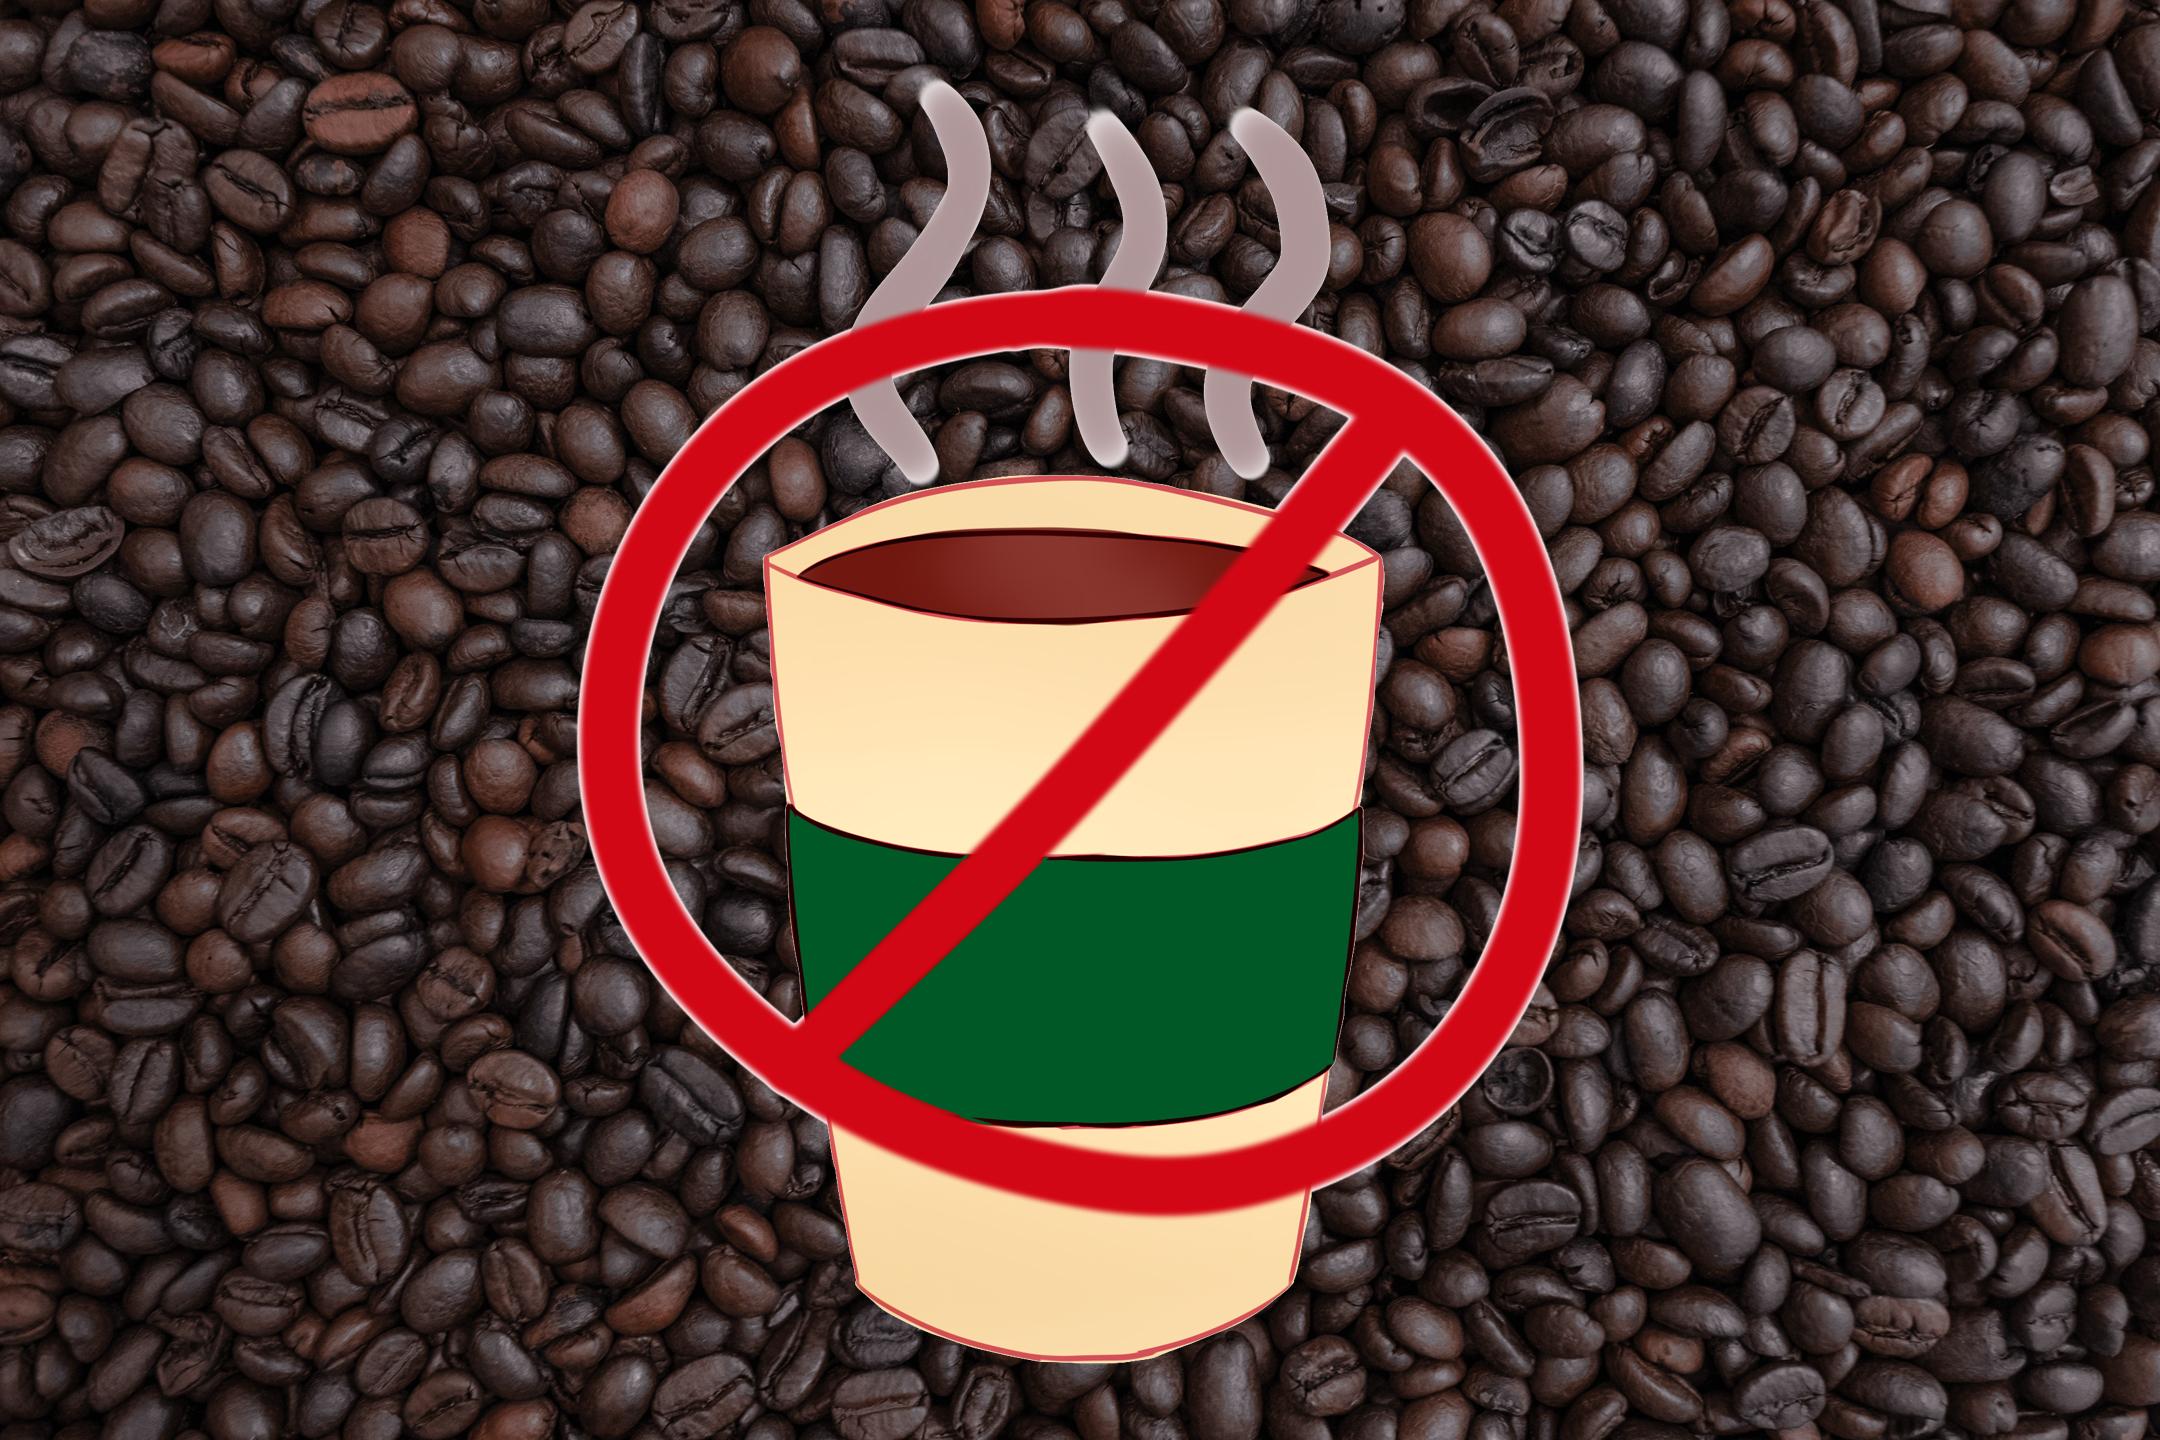 Coffee cup with cancelled sign on it